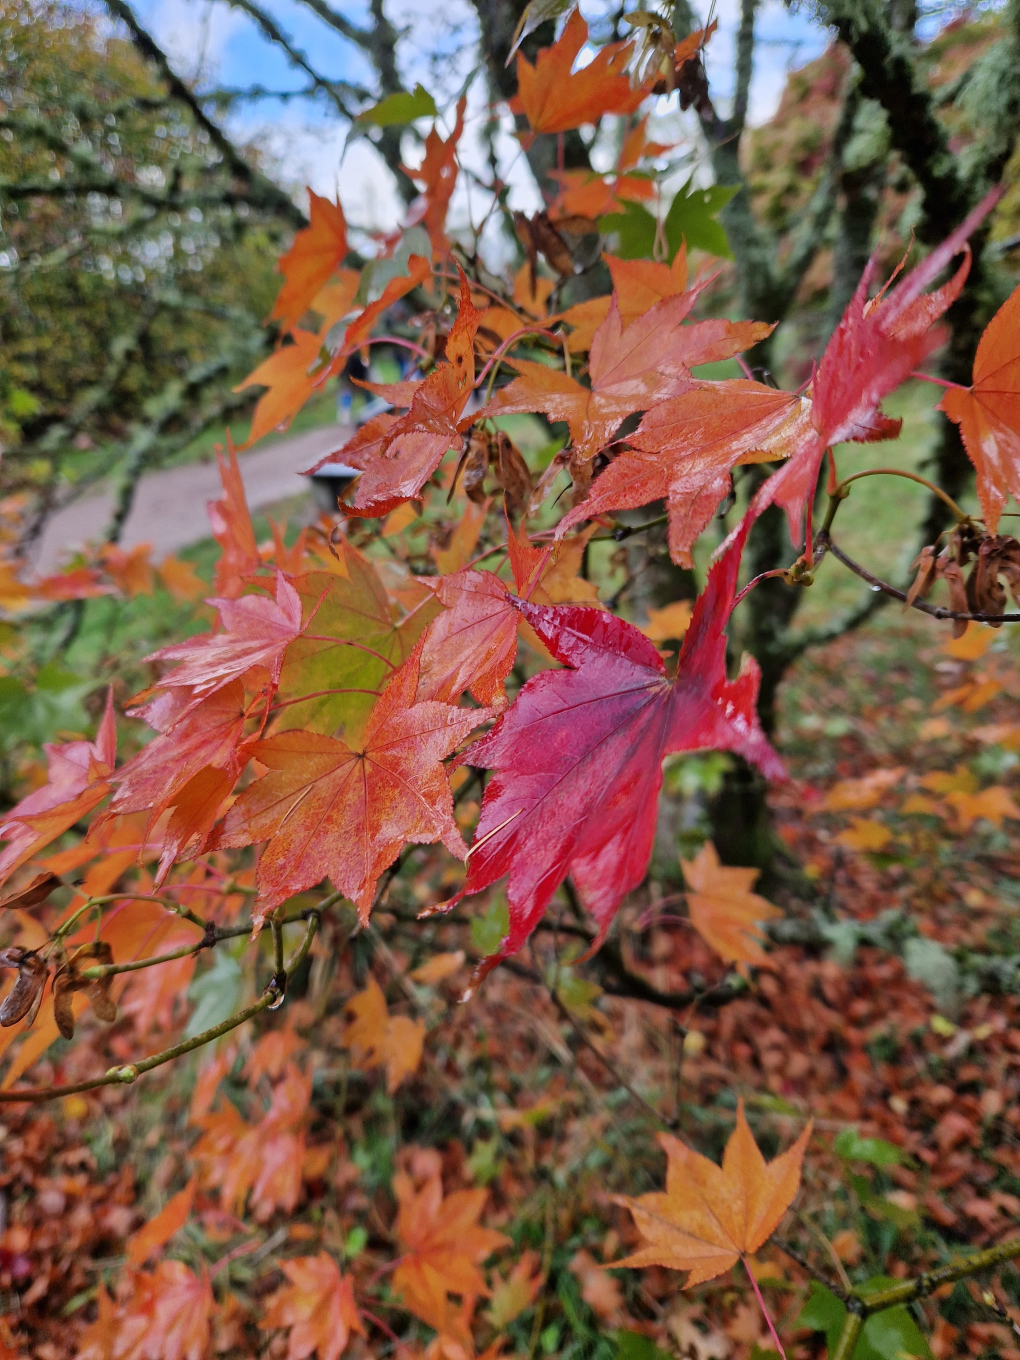 Red and orange maple leaves, ready to fall from a dark and wet tree standing on lush green grass